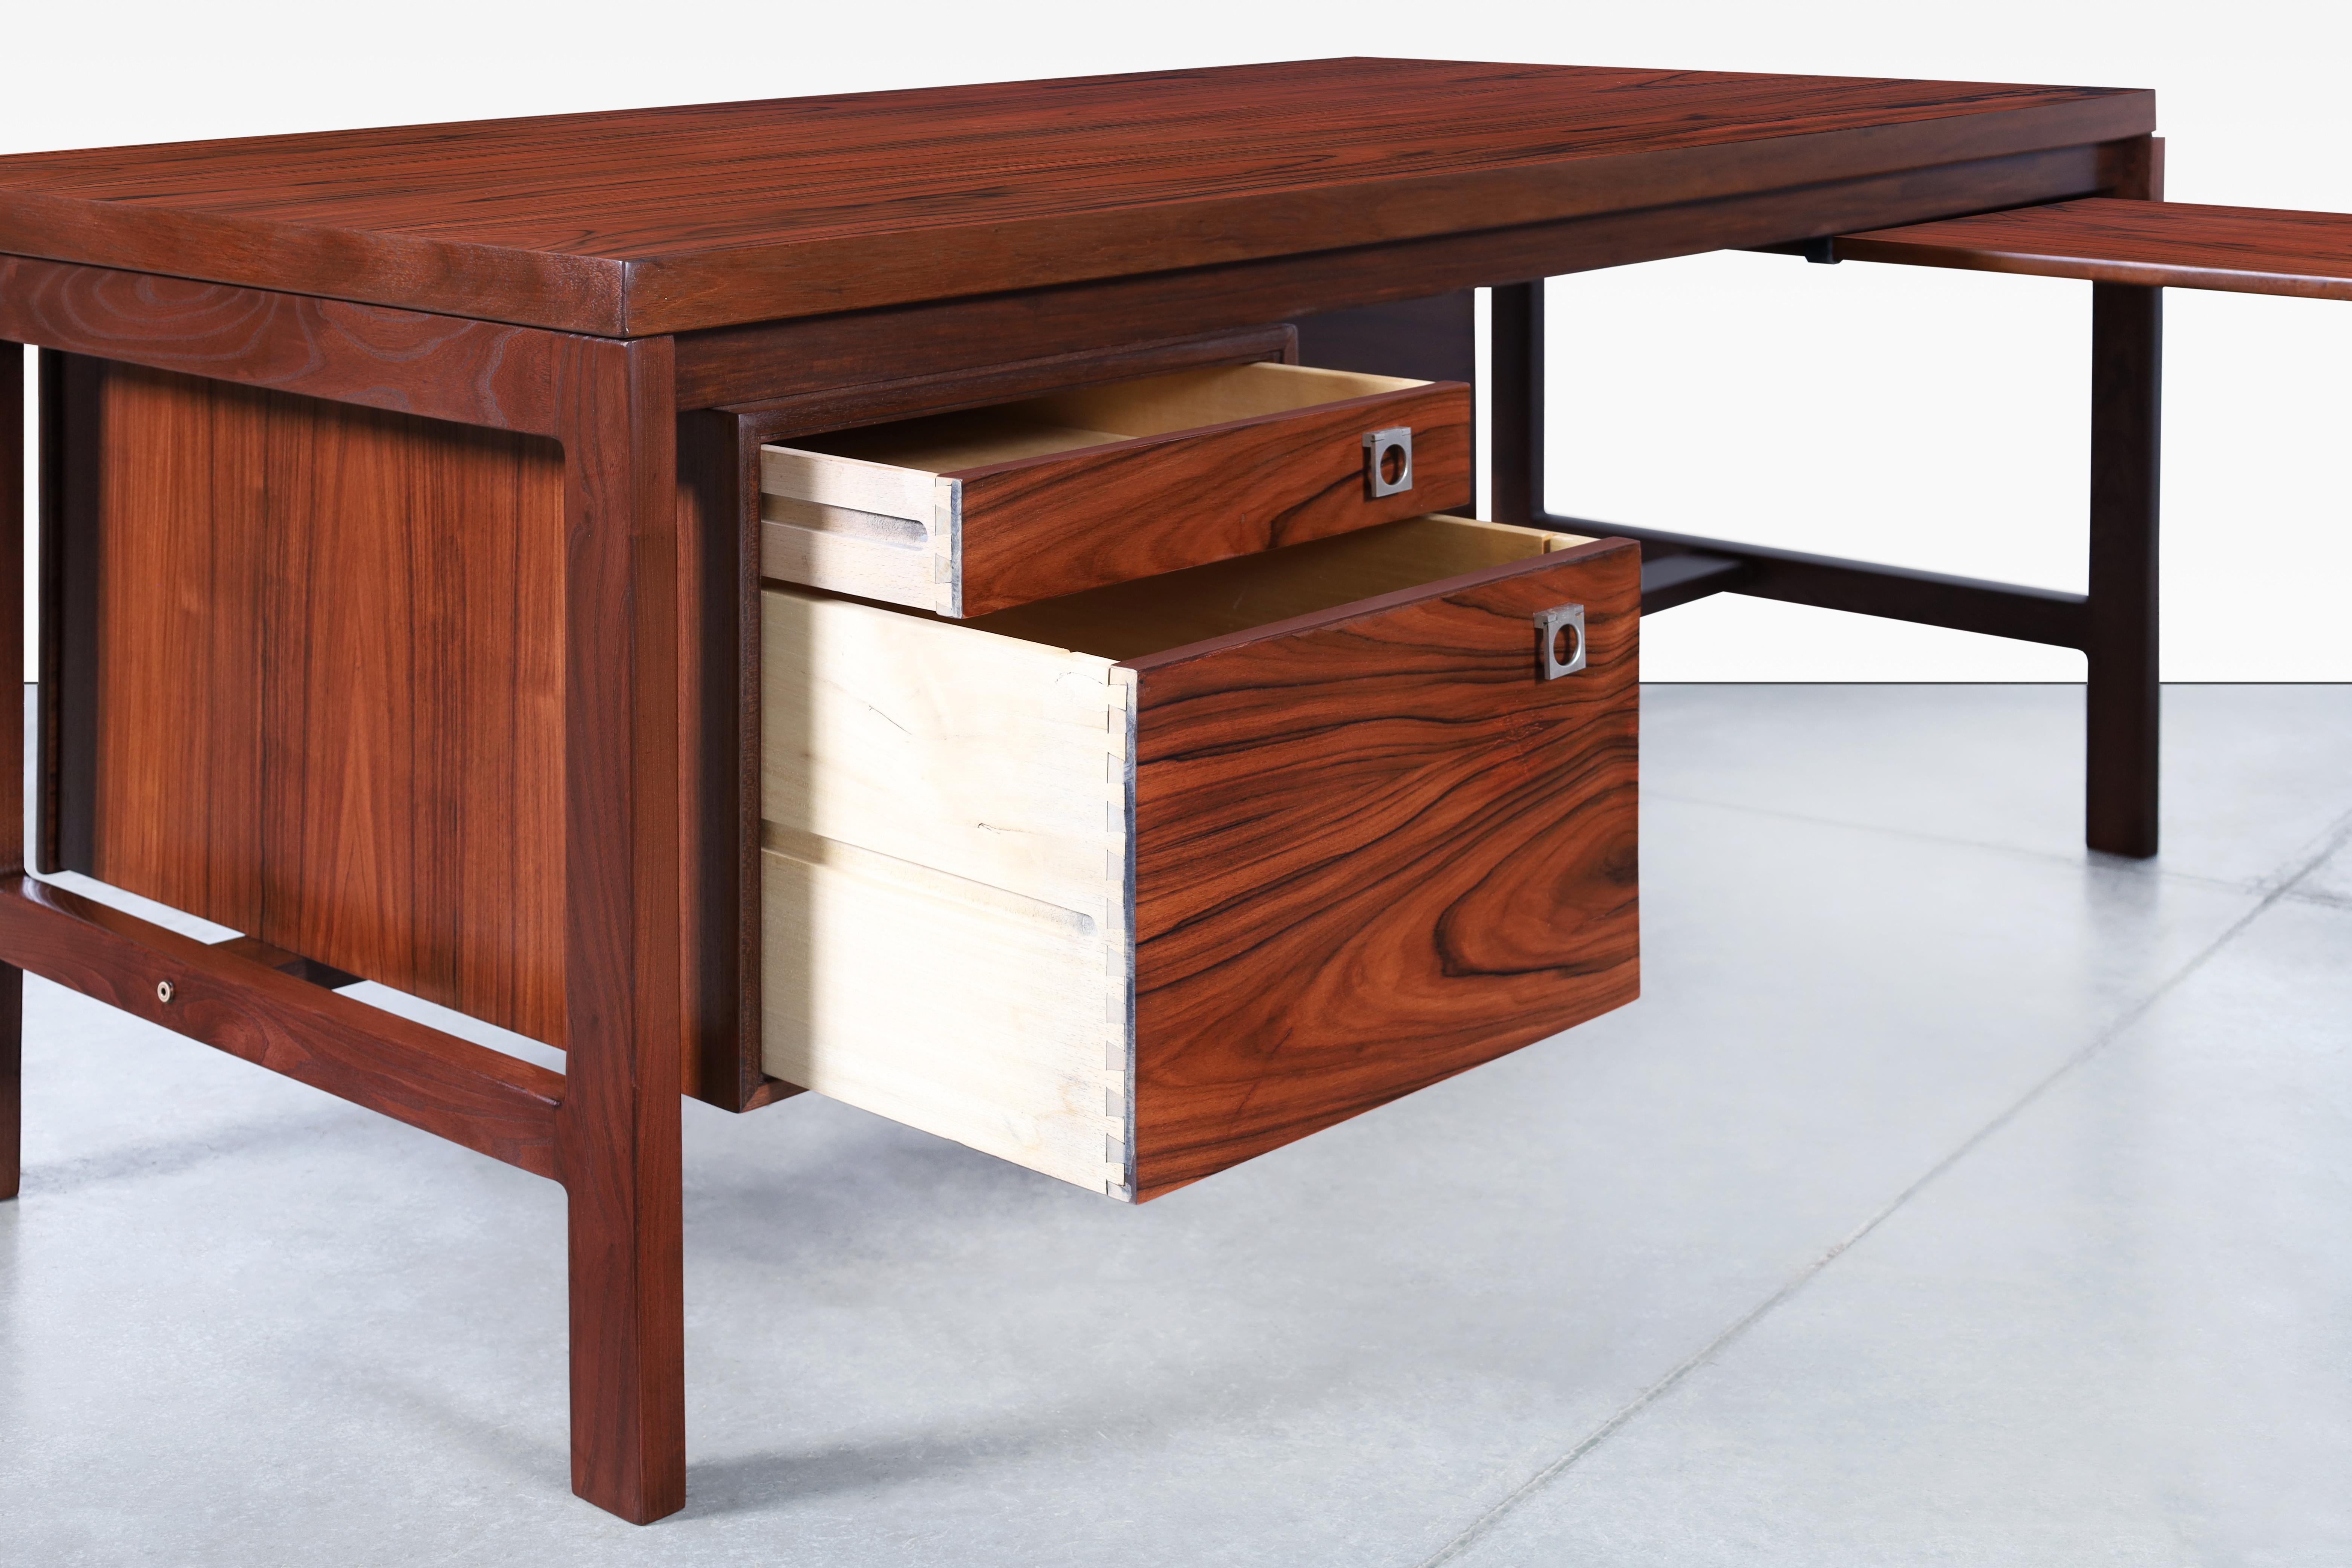 Danish Modern Rosewood L-Shaped Desk by Arne Vodder for H.P. Hansen In Excellent Condition For Sale In North Hollywood, CA